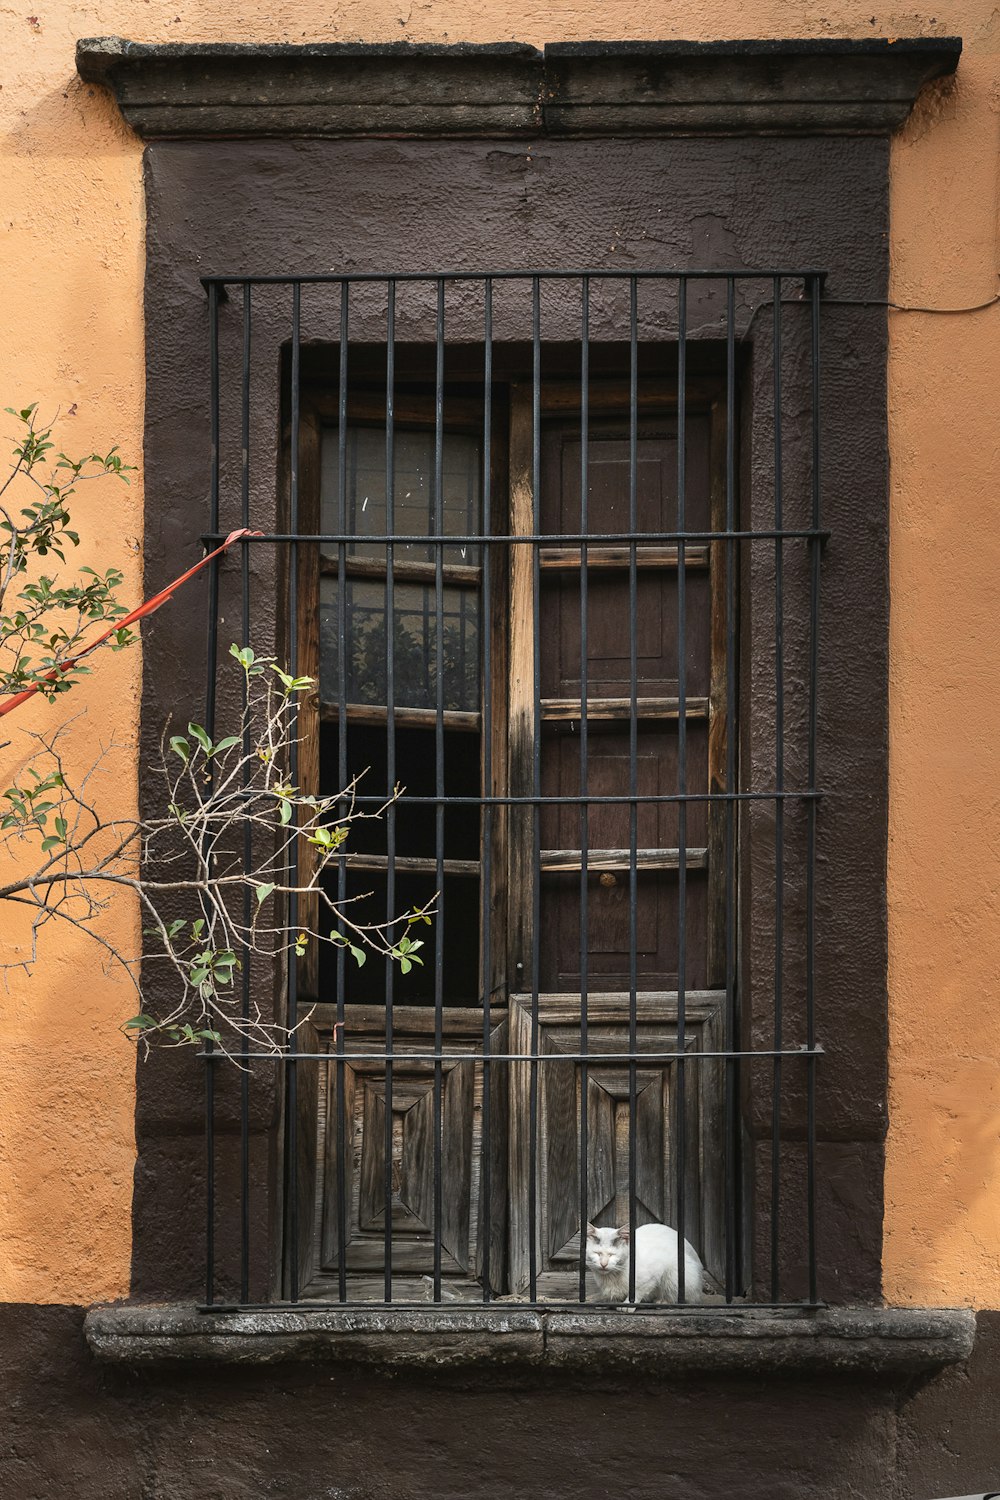 a cat sitting in a window of a building